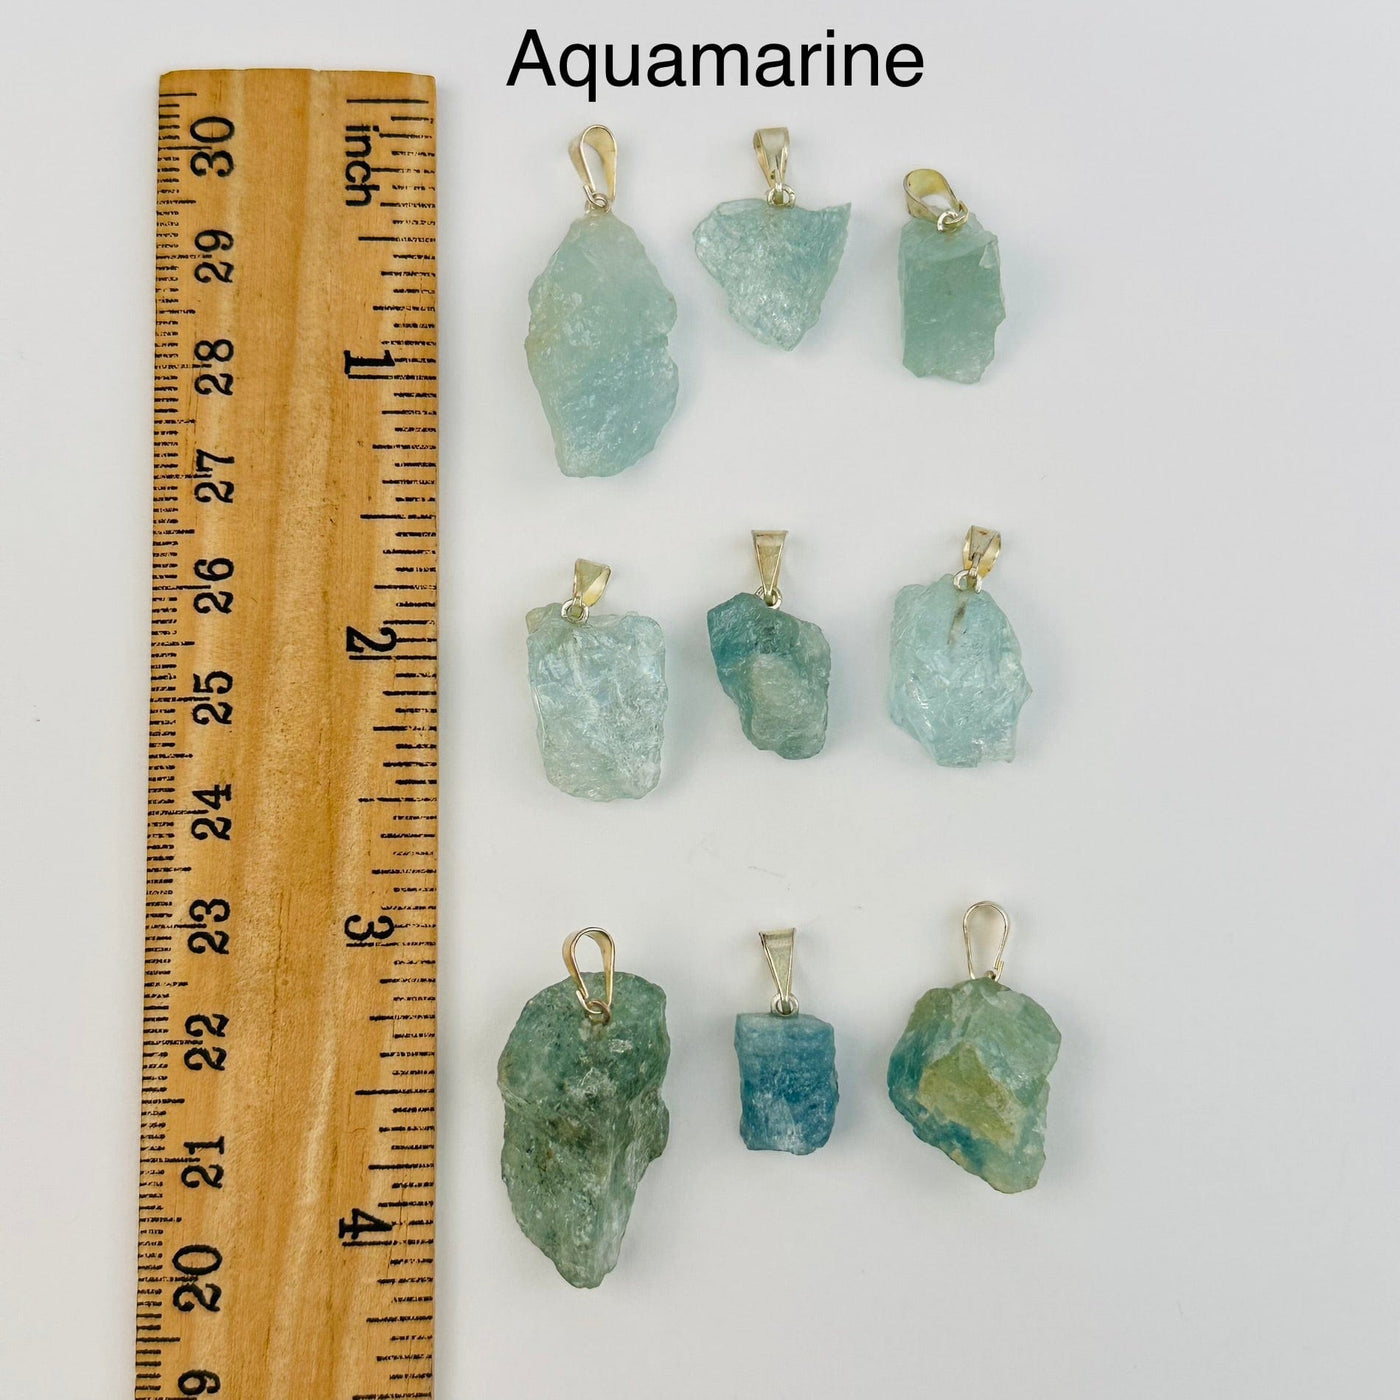 aquamarine pendants next to a ruler for size reference 